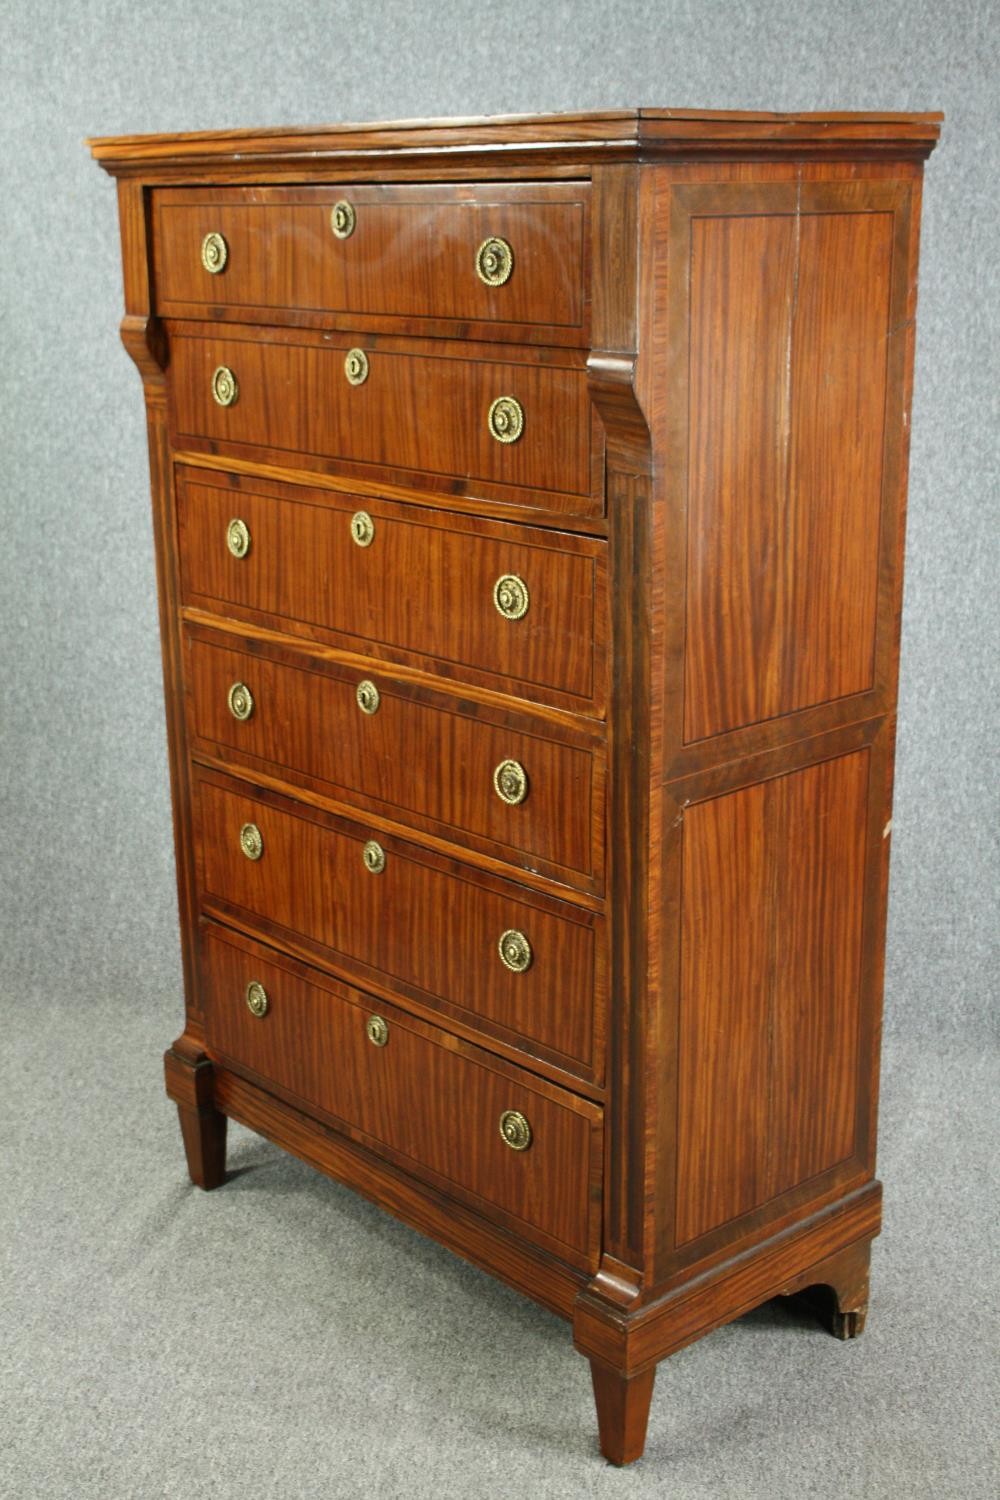 An early 19th century satinwood and crossbanded Biedermeier secretaire chest of six drawers with a - Image 3 of 8